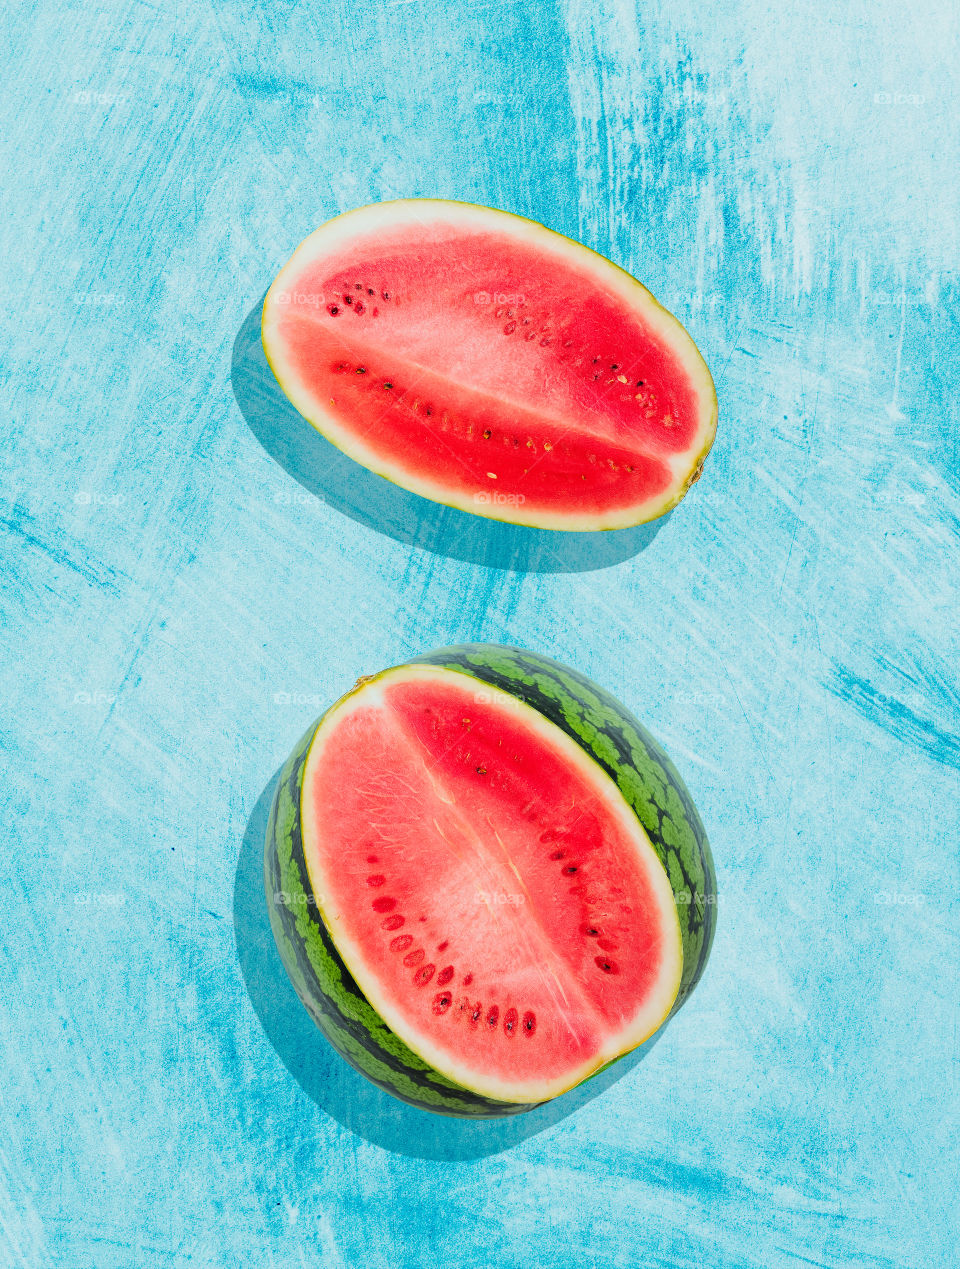 Pieces of watermelon on background painted in blue